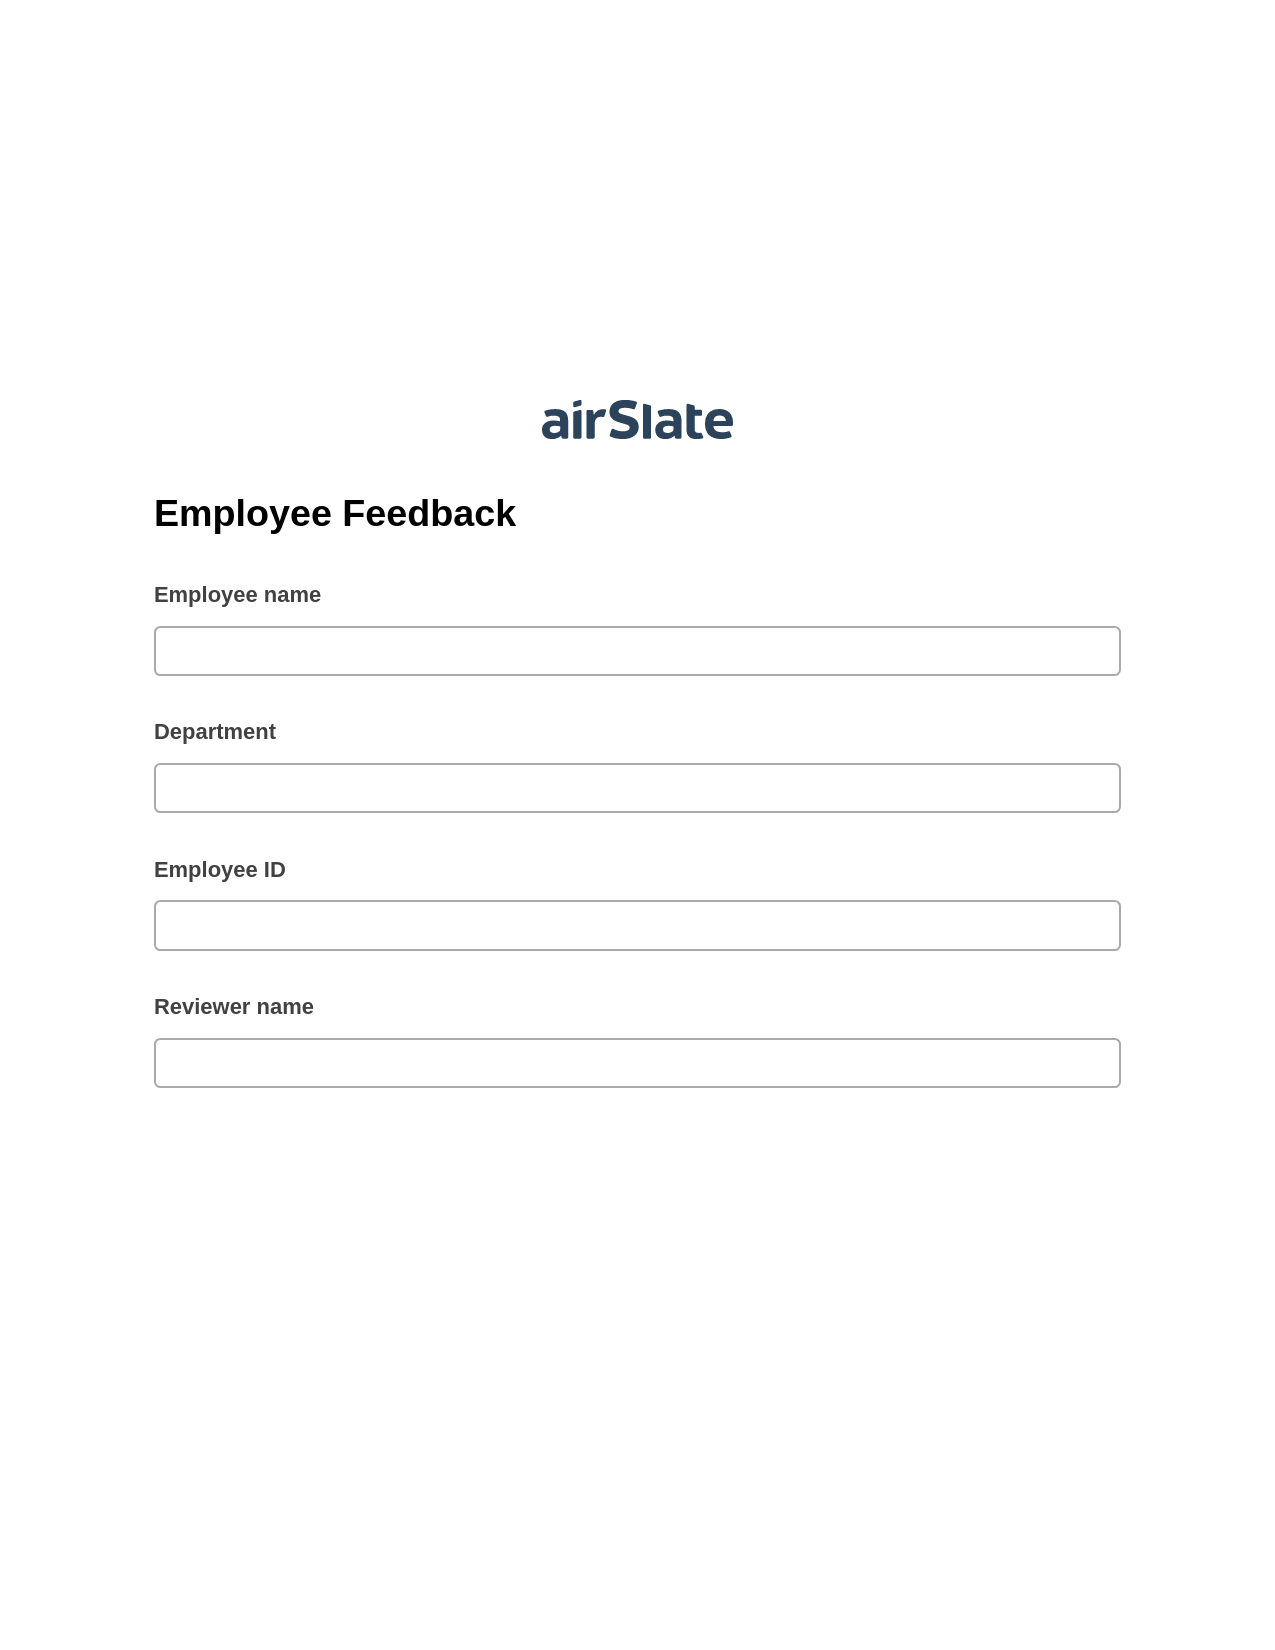 Employee Feedback Pre-fill from CSV File Bot, Roles Reminder Bot, Post-finish Document Bot